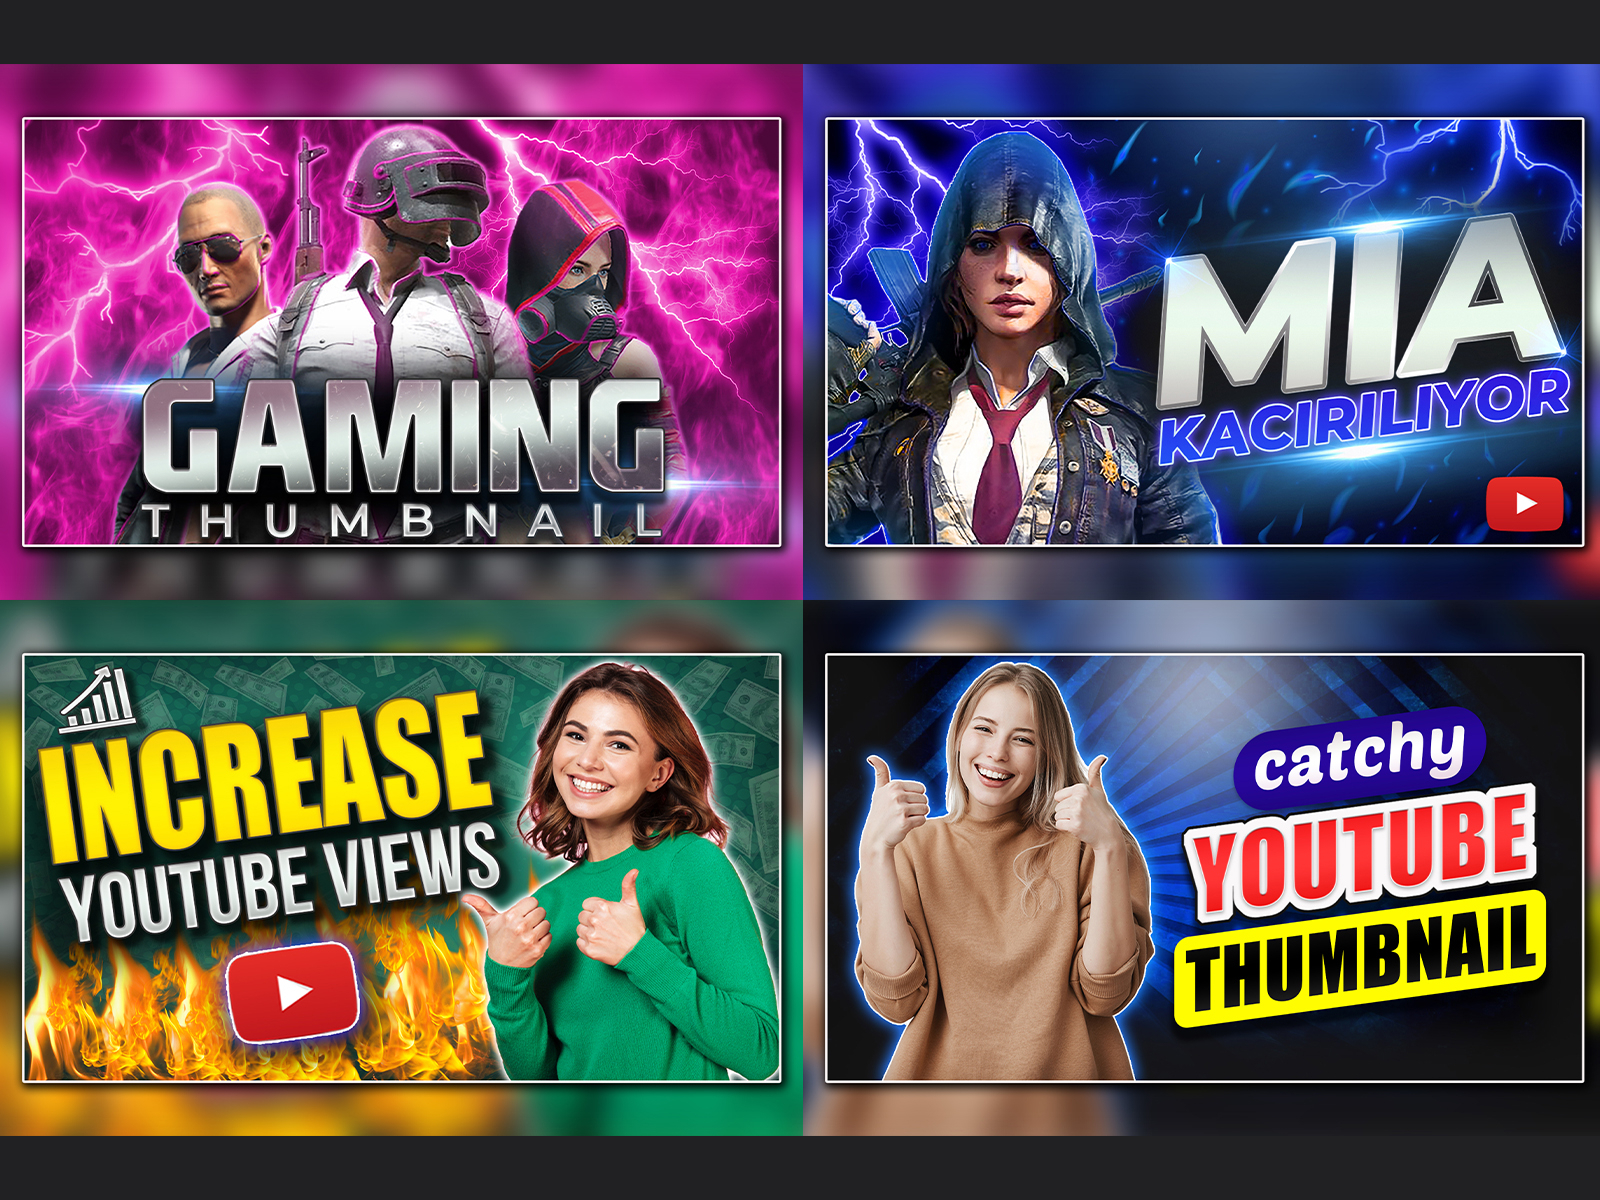 gaming-youtube-thumbnail-design-template-by-rifat-tanvir-on-dribbble